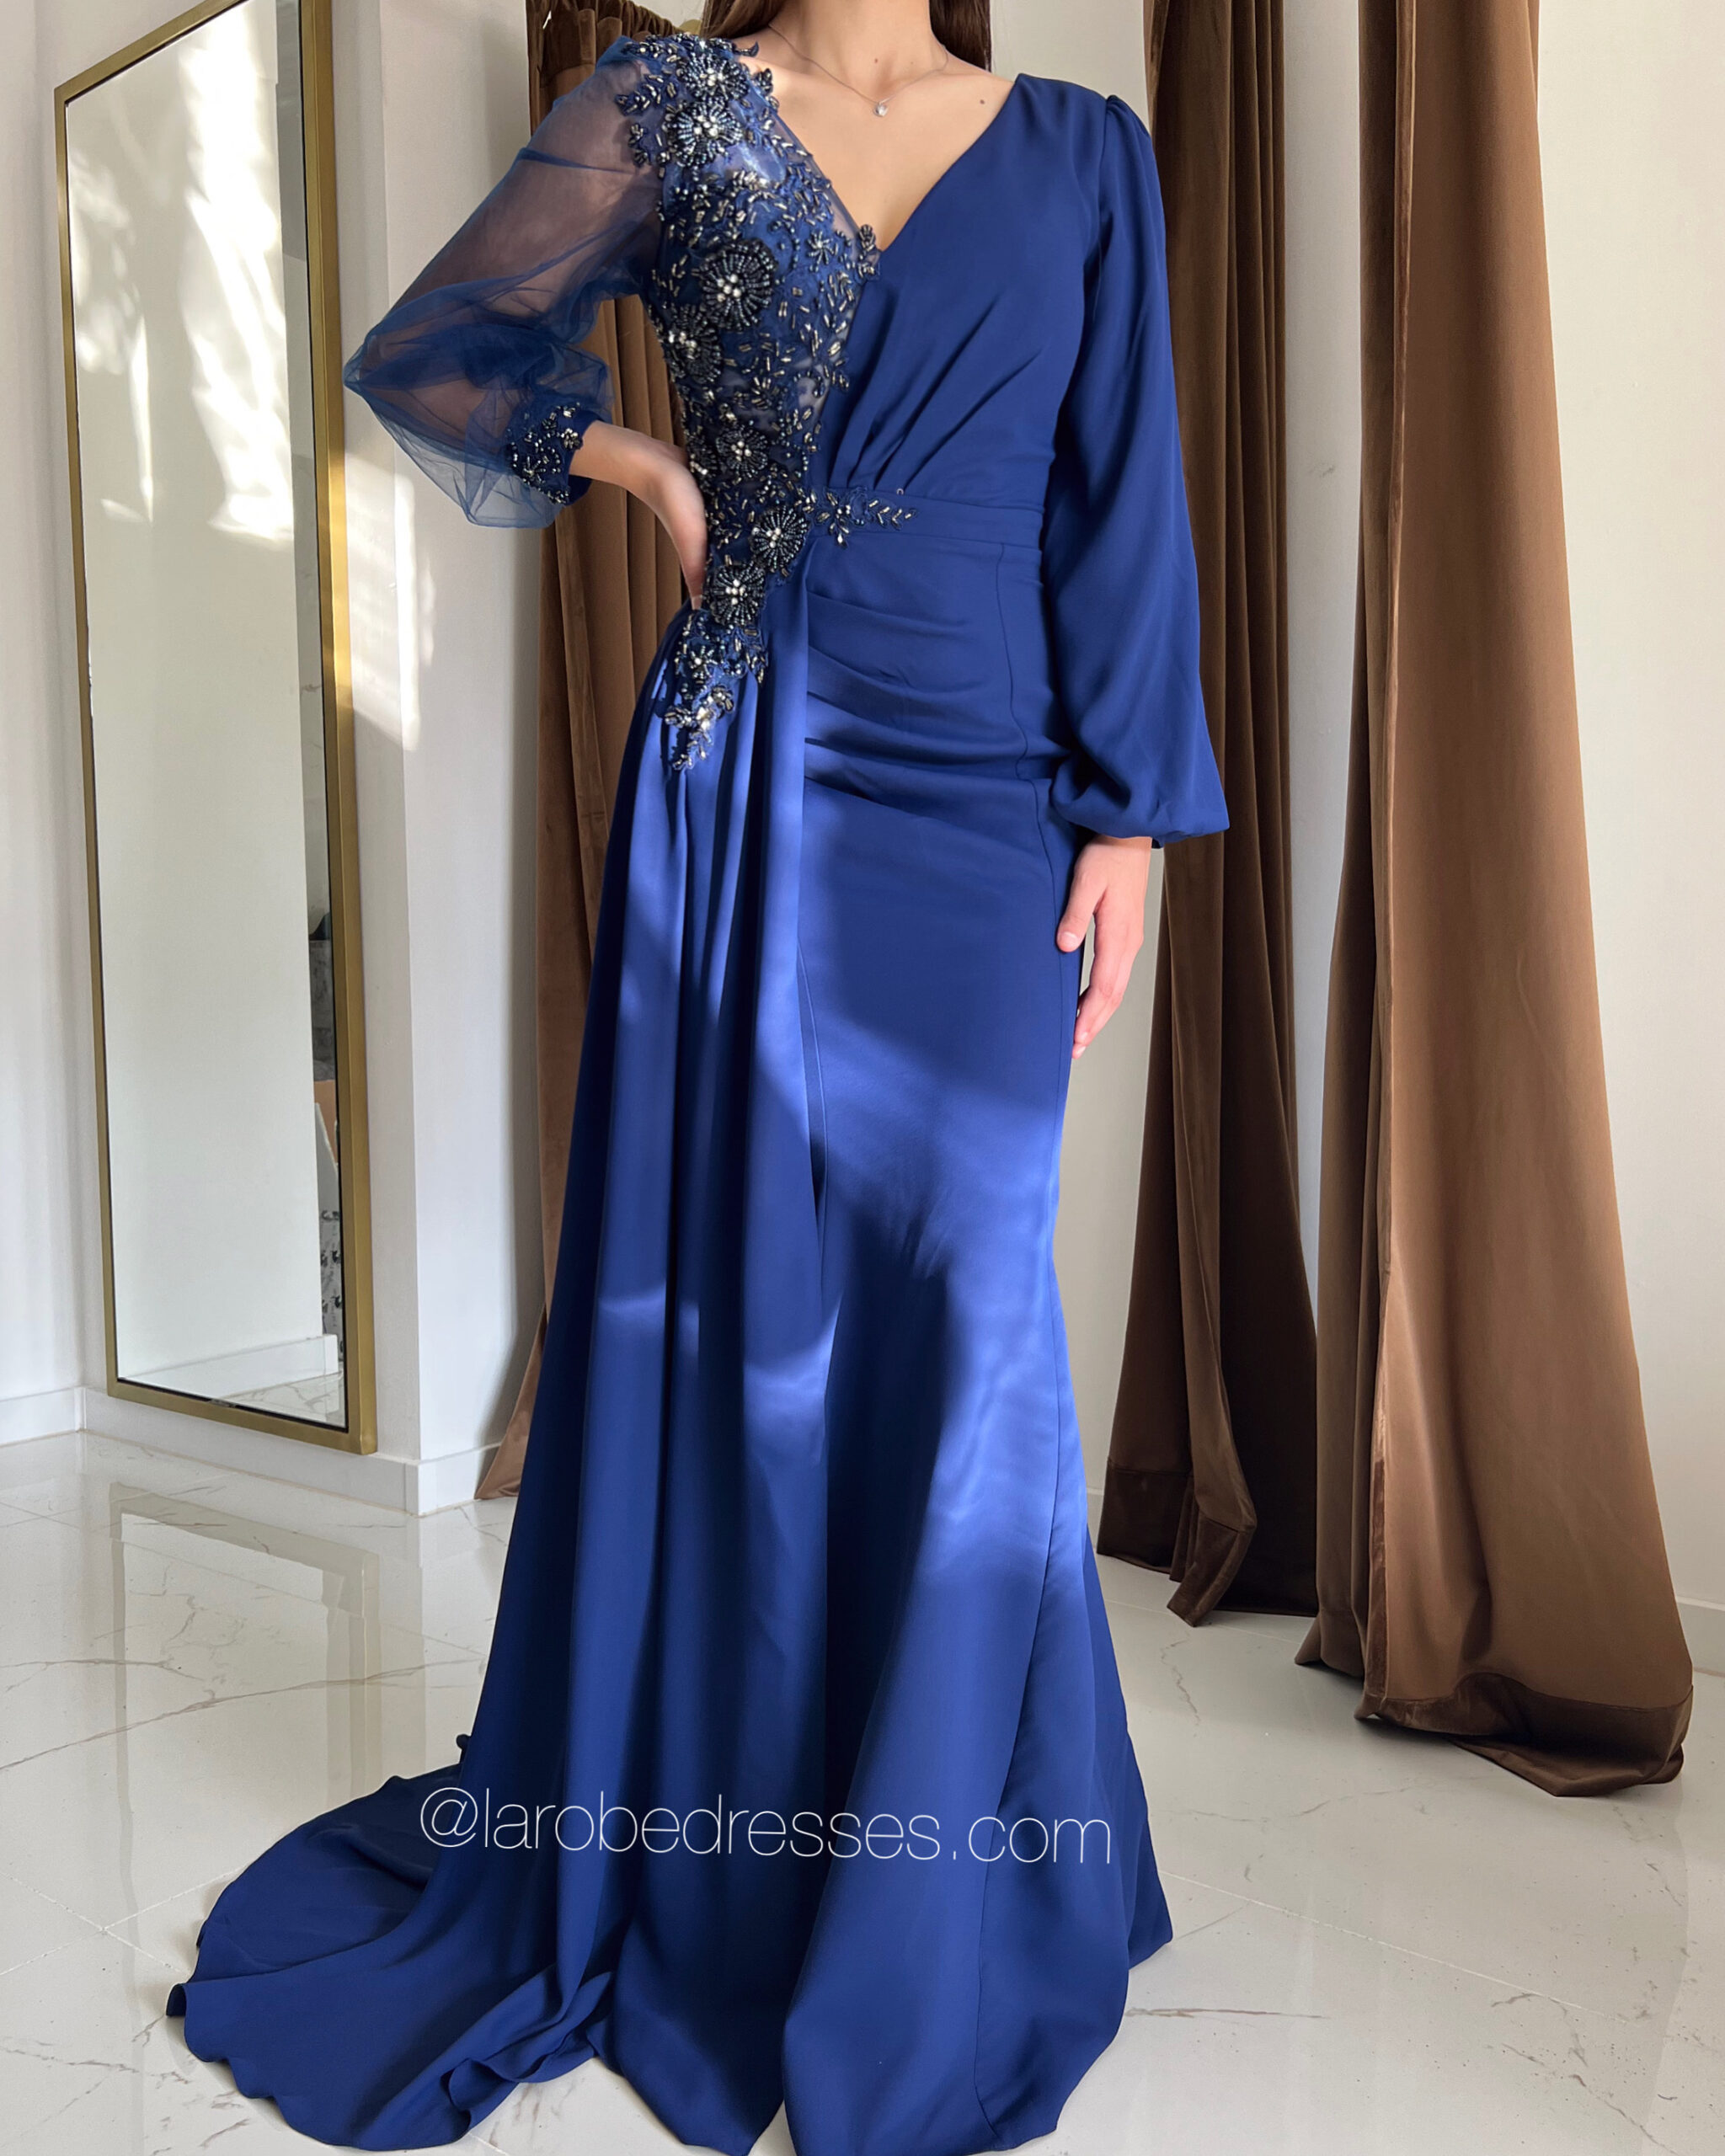 blue-dress-with-long-sleeves-and-embroidery-larobe-dresses